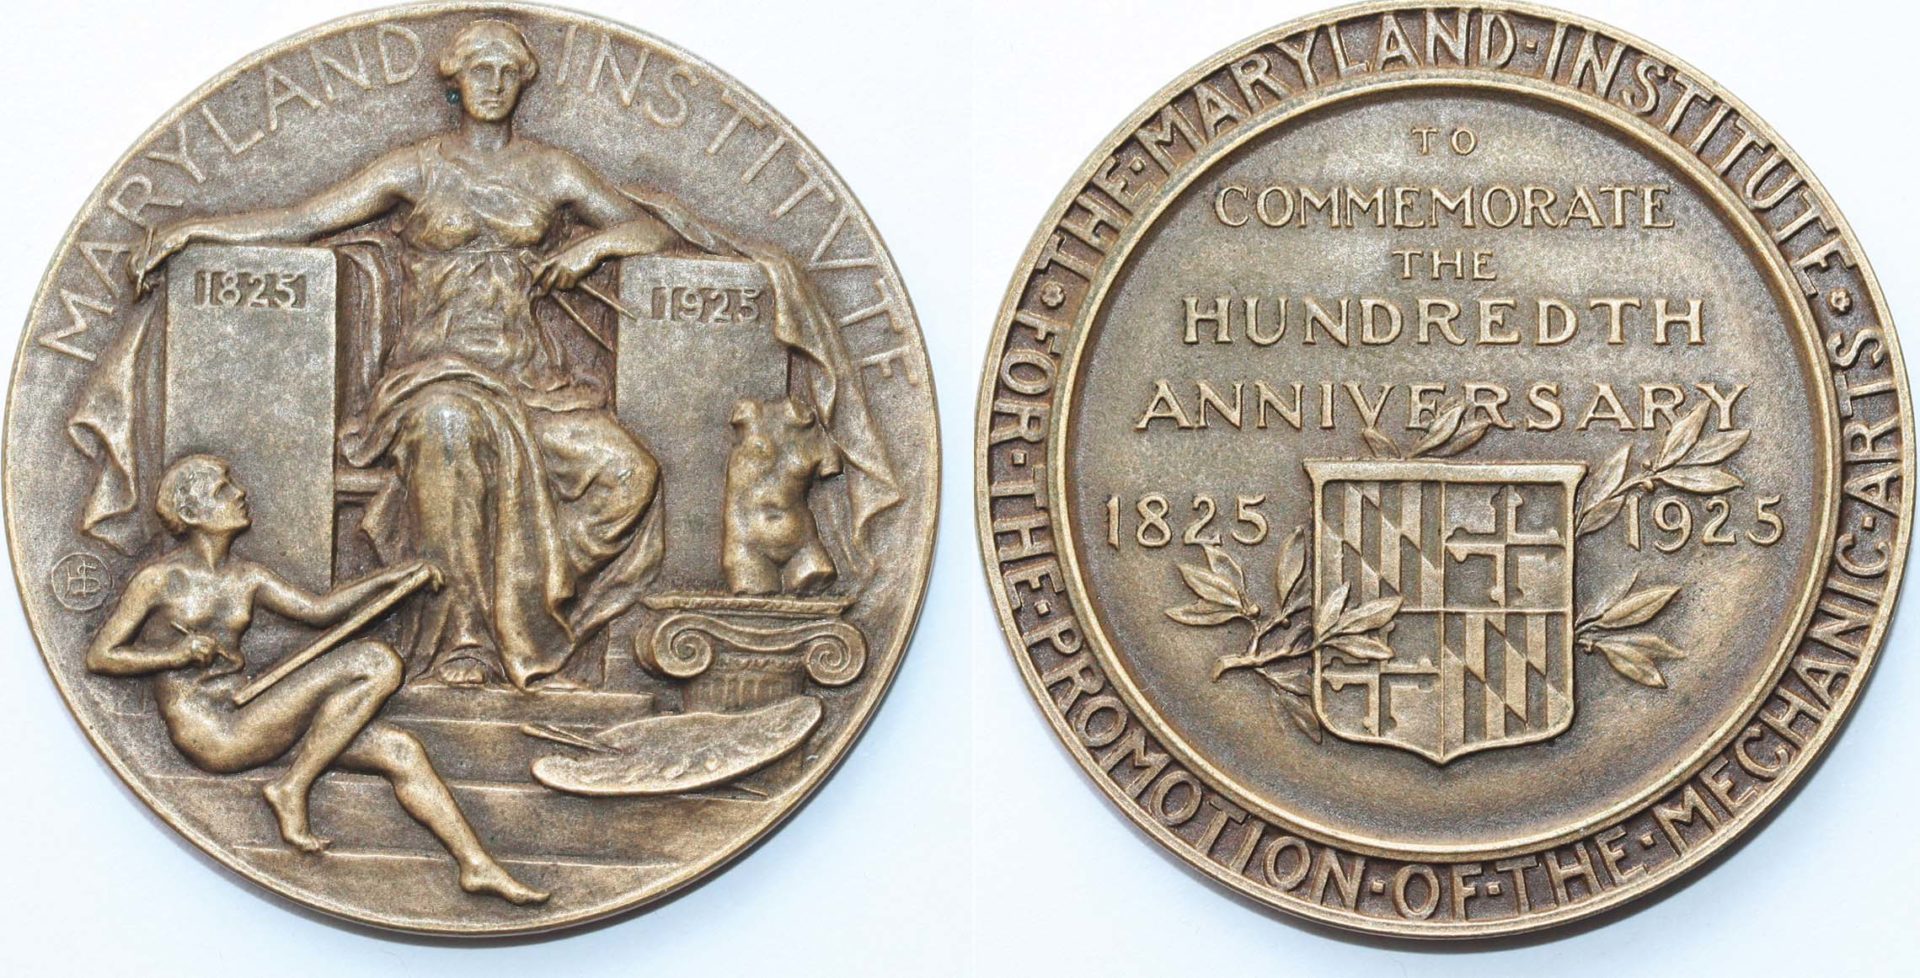 Hans Schuler's medal for the Maryland Institute's 100th anniversary.